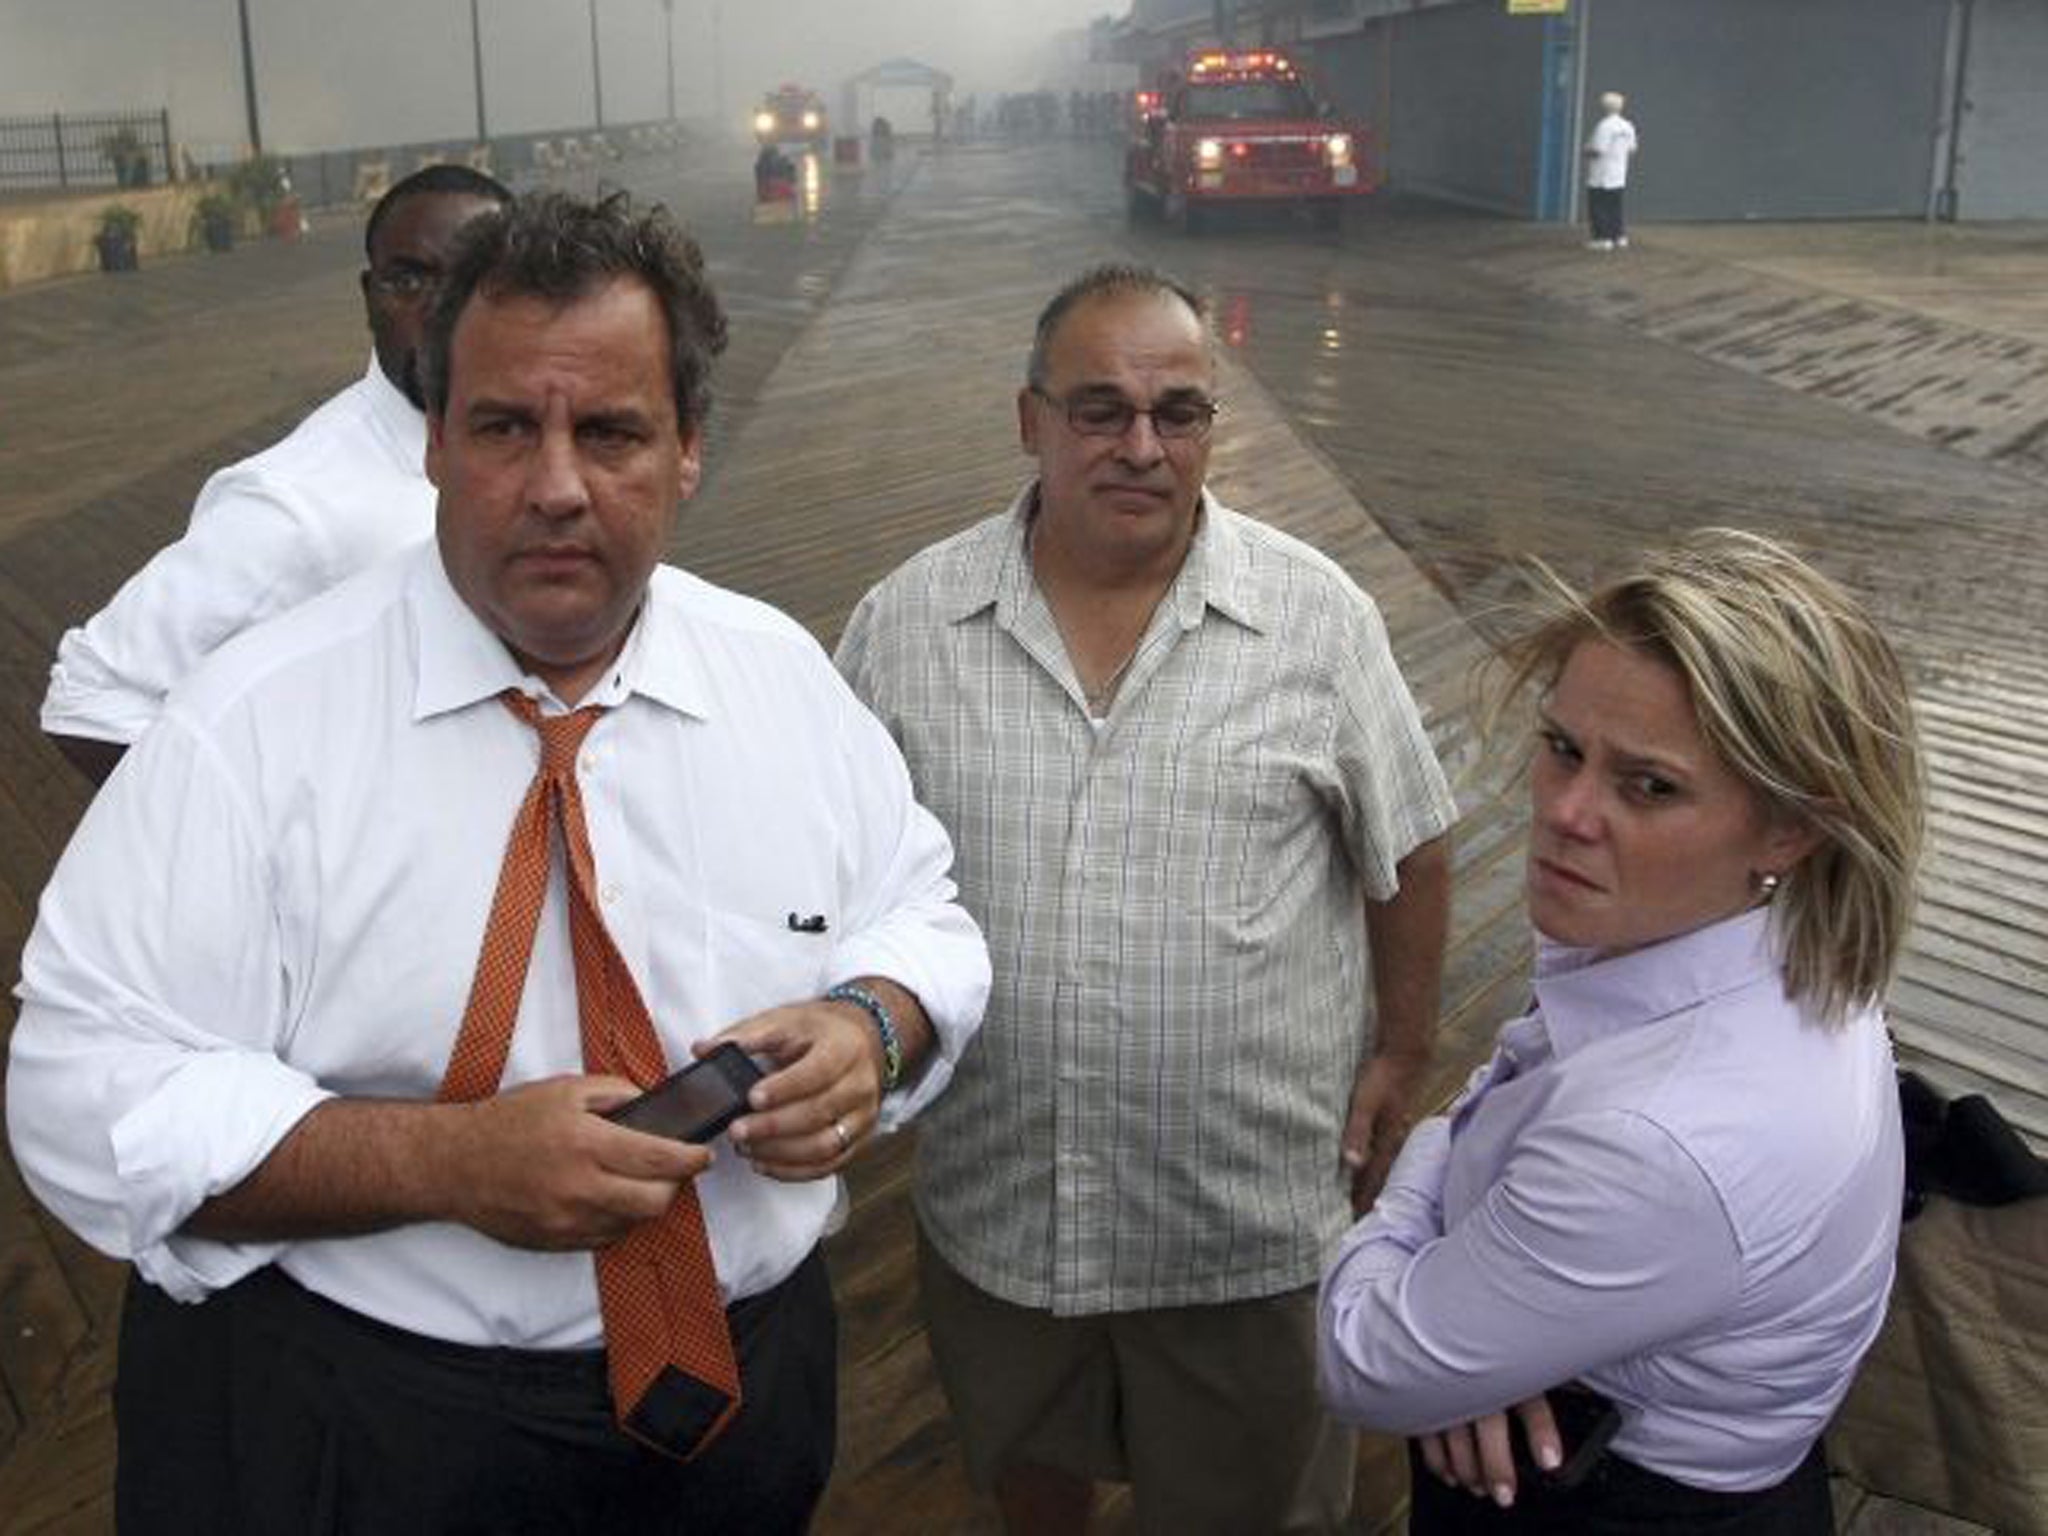 Chris Christie, front left, has dismissed his deputy chief of staff, Bridget Anne Kelly, right